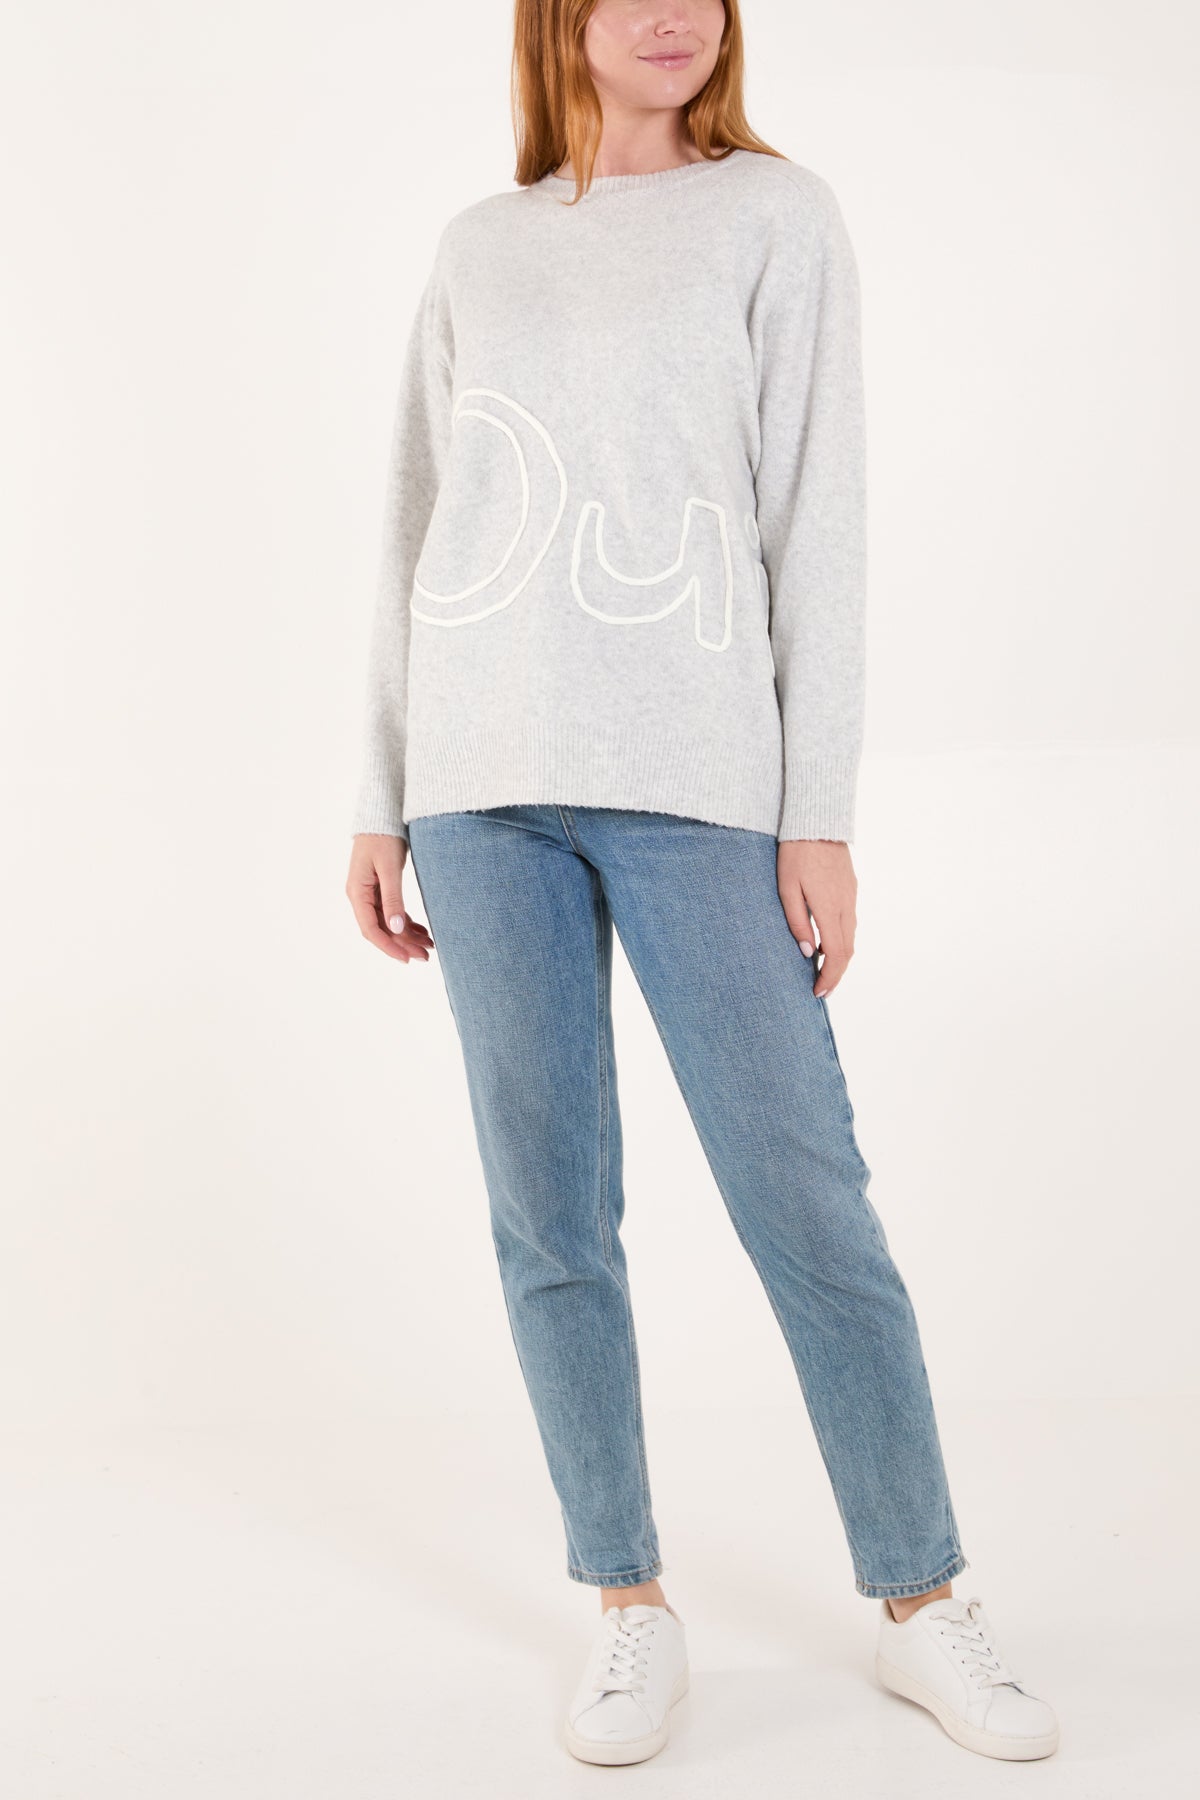 'Oui' & 'Yes' Embroidery Jumper